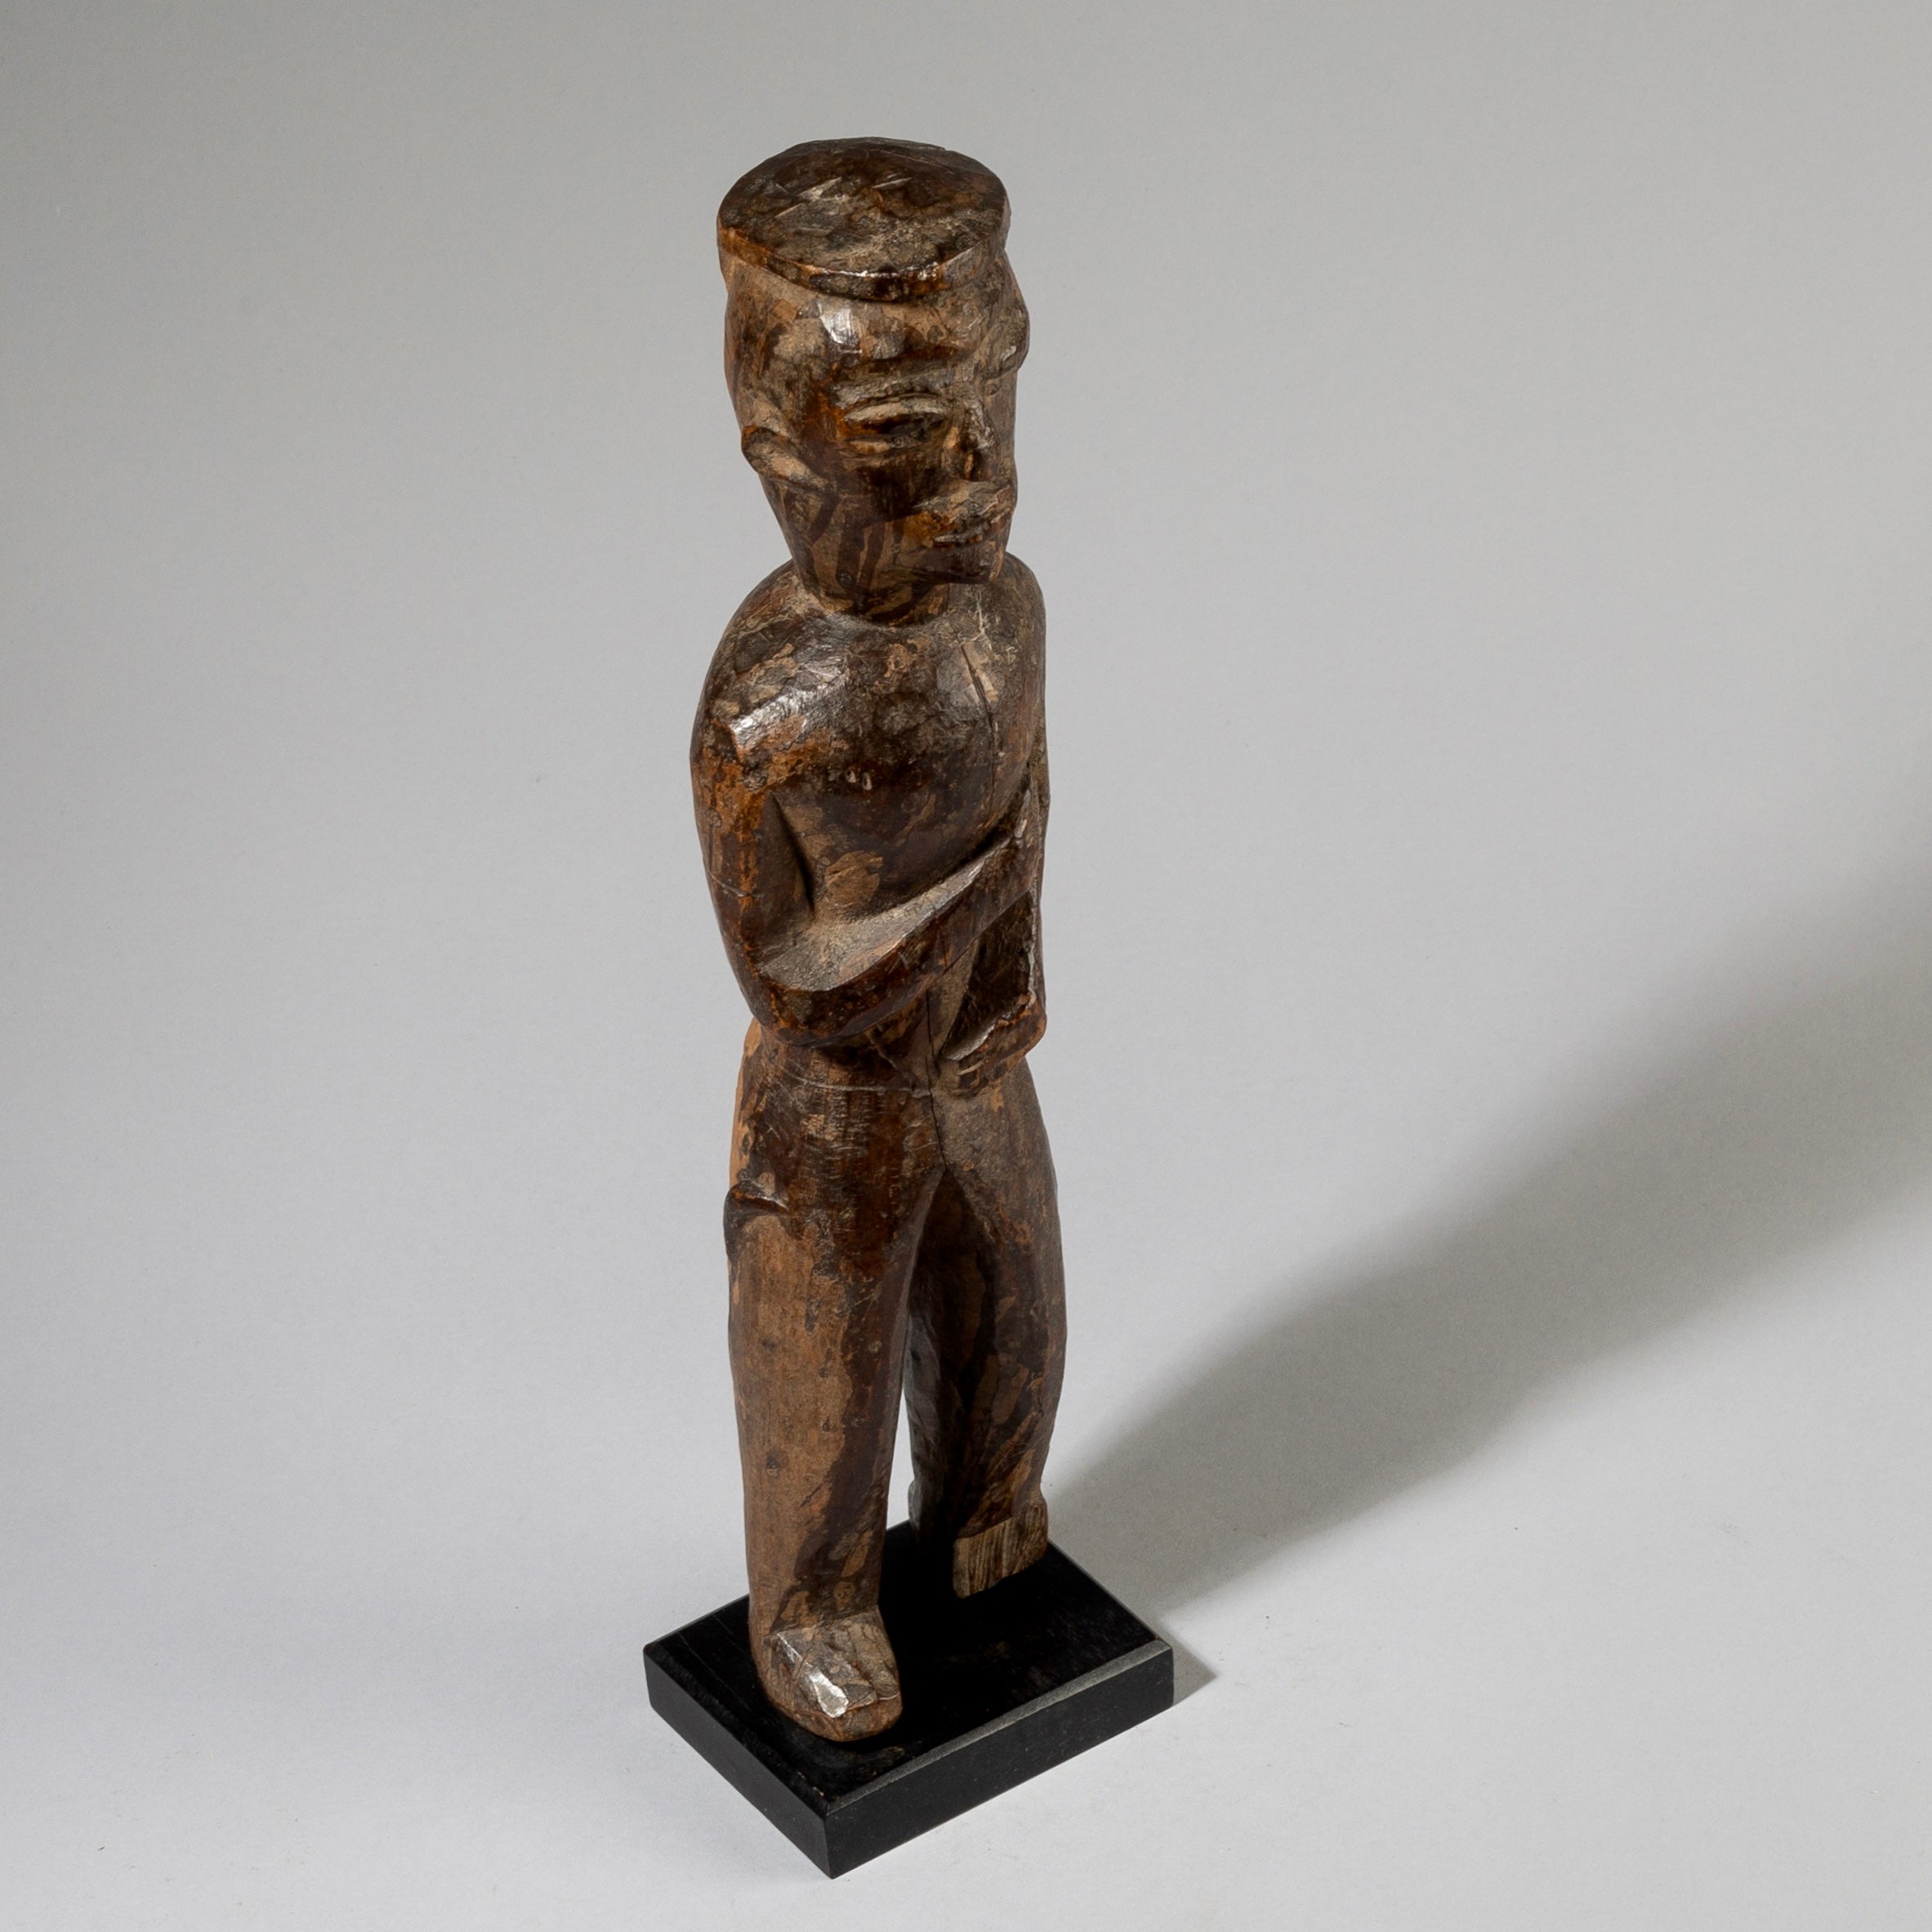 A TALL, DIGNIFIED LOBI THIL FIGURE FROM BURKINA FASO W.AFRICA  ( No 751 )